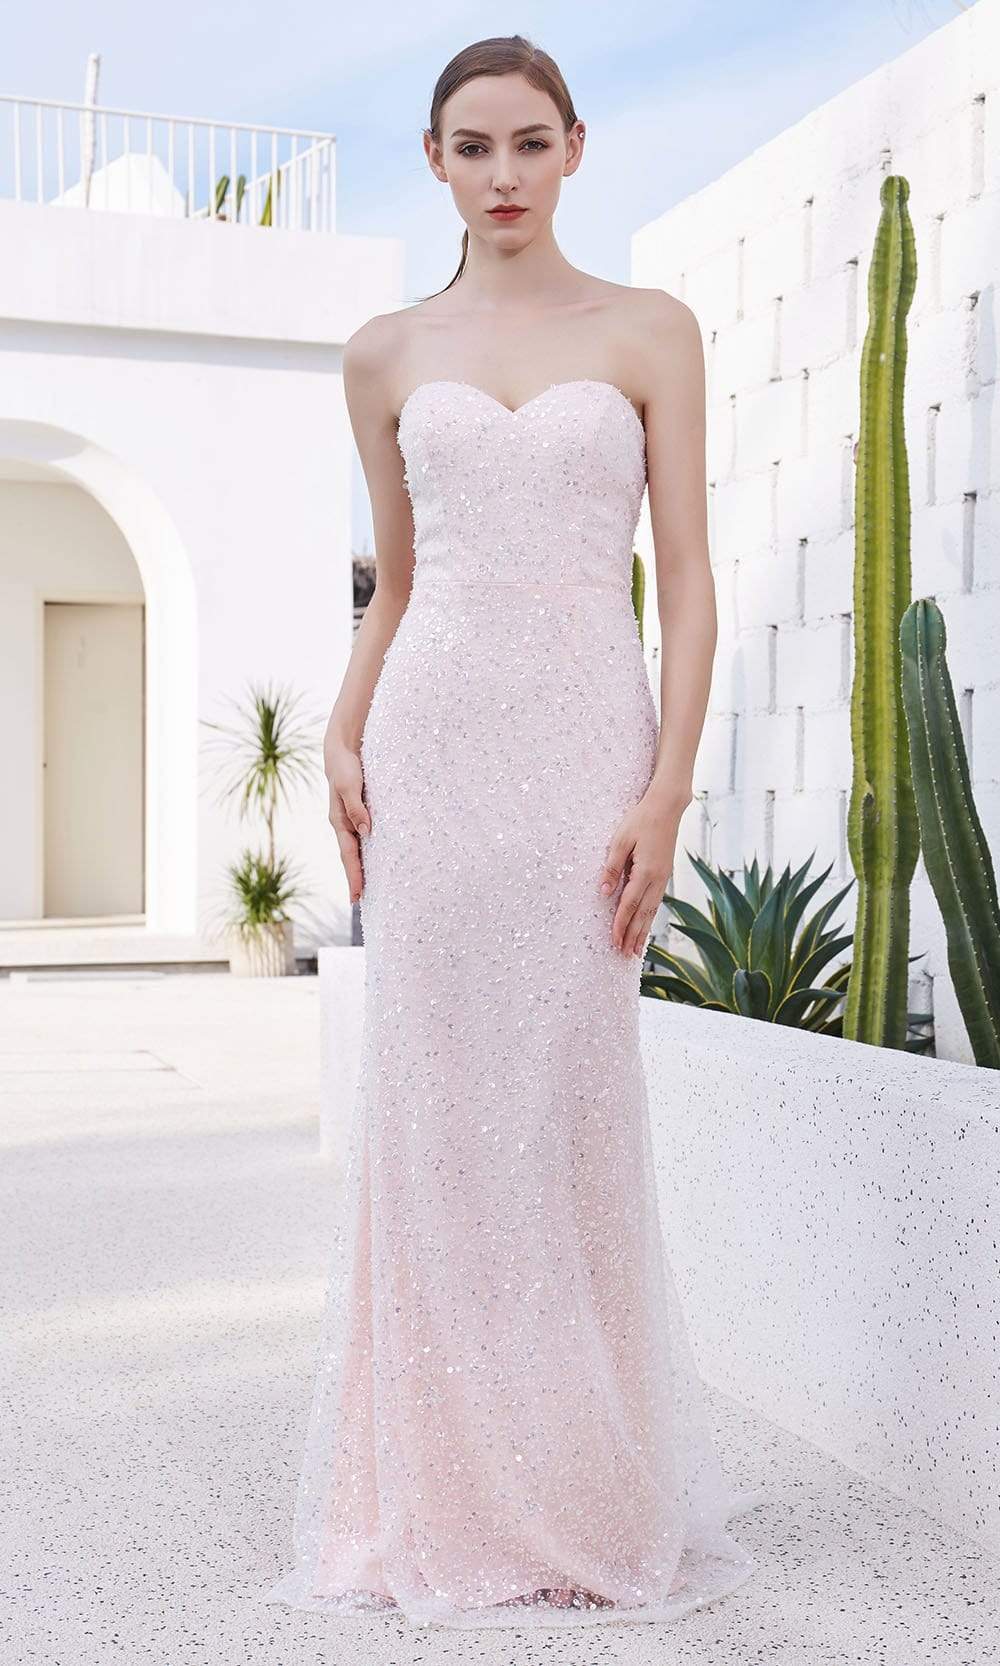 Image of J'Adore Dresses - JM106 Strapless Sweetheart Glass Beaded Gown